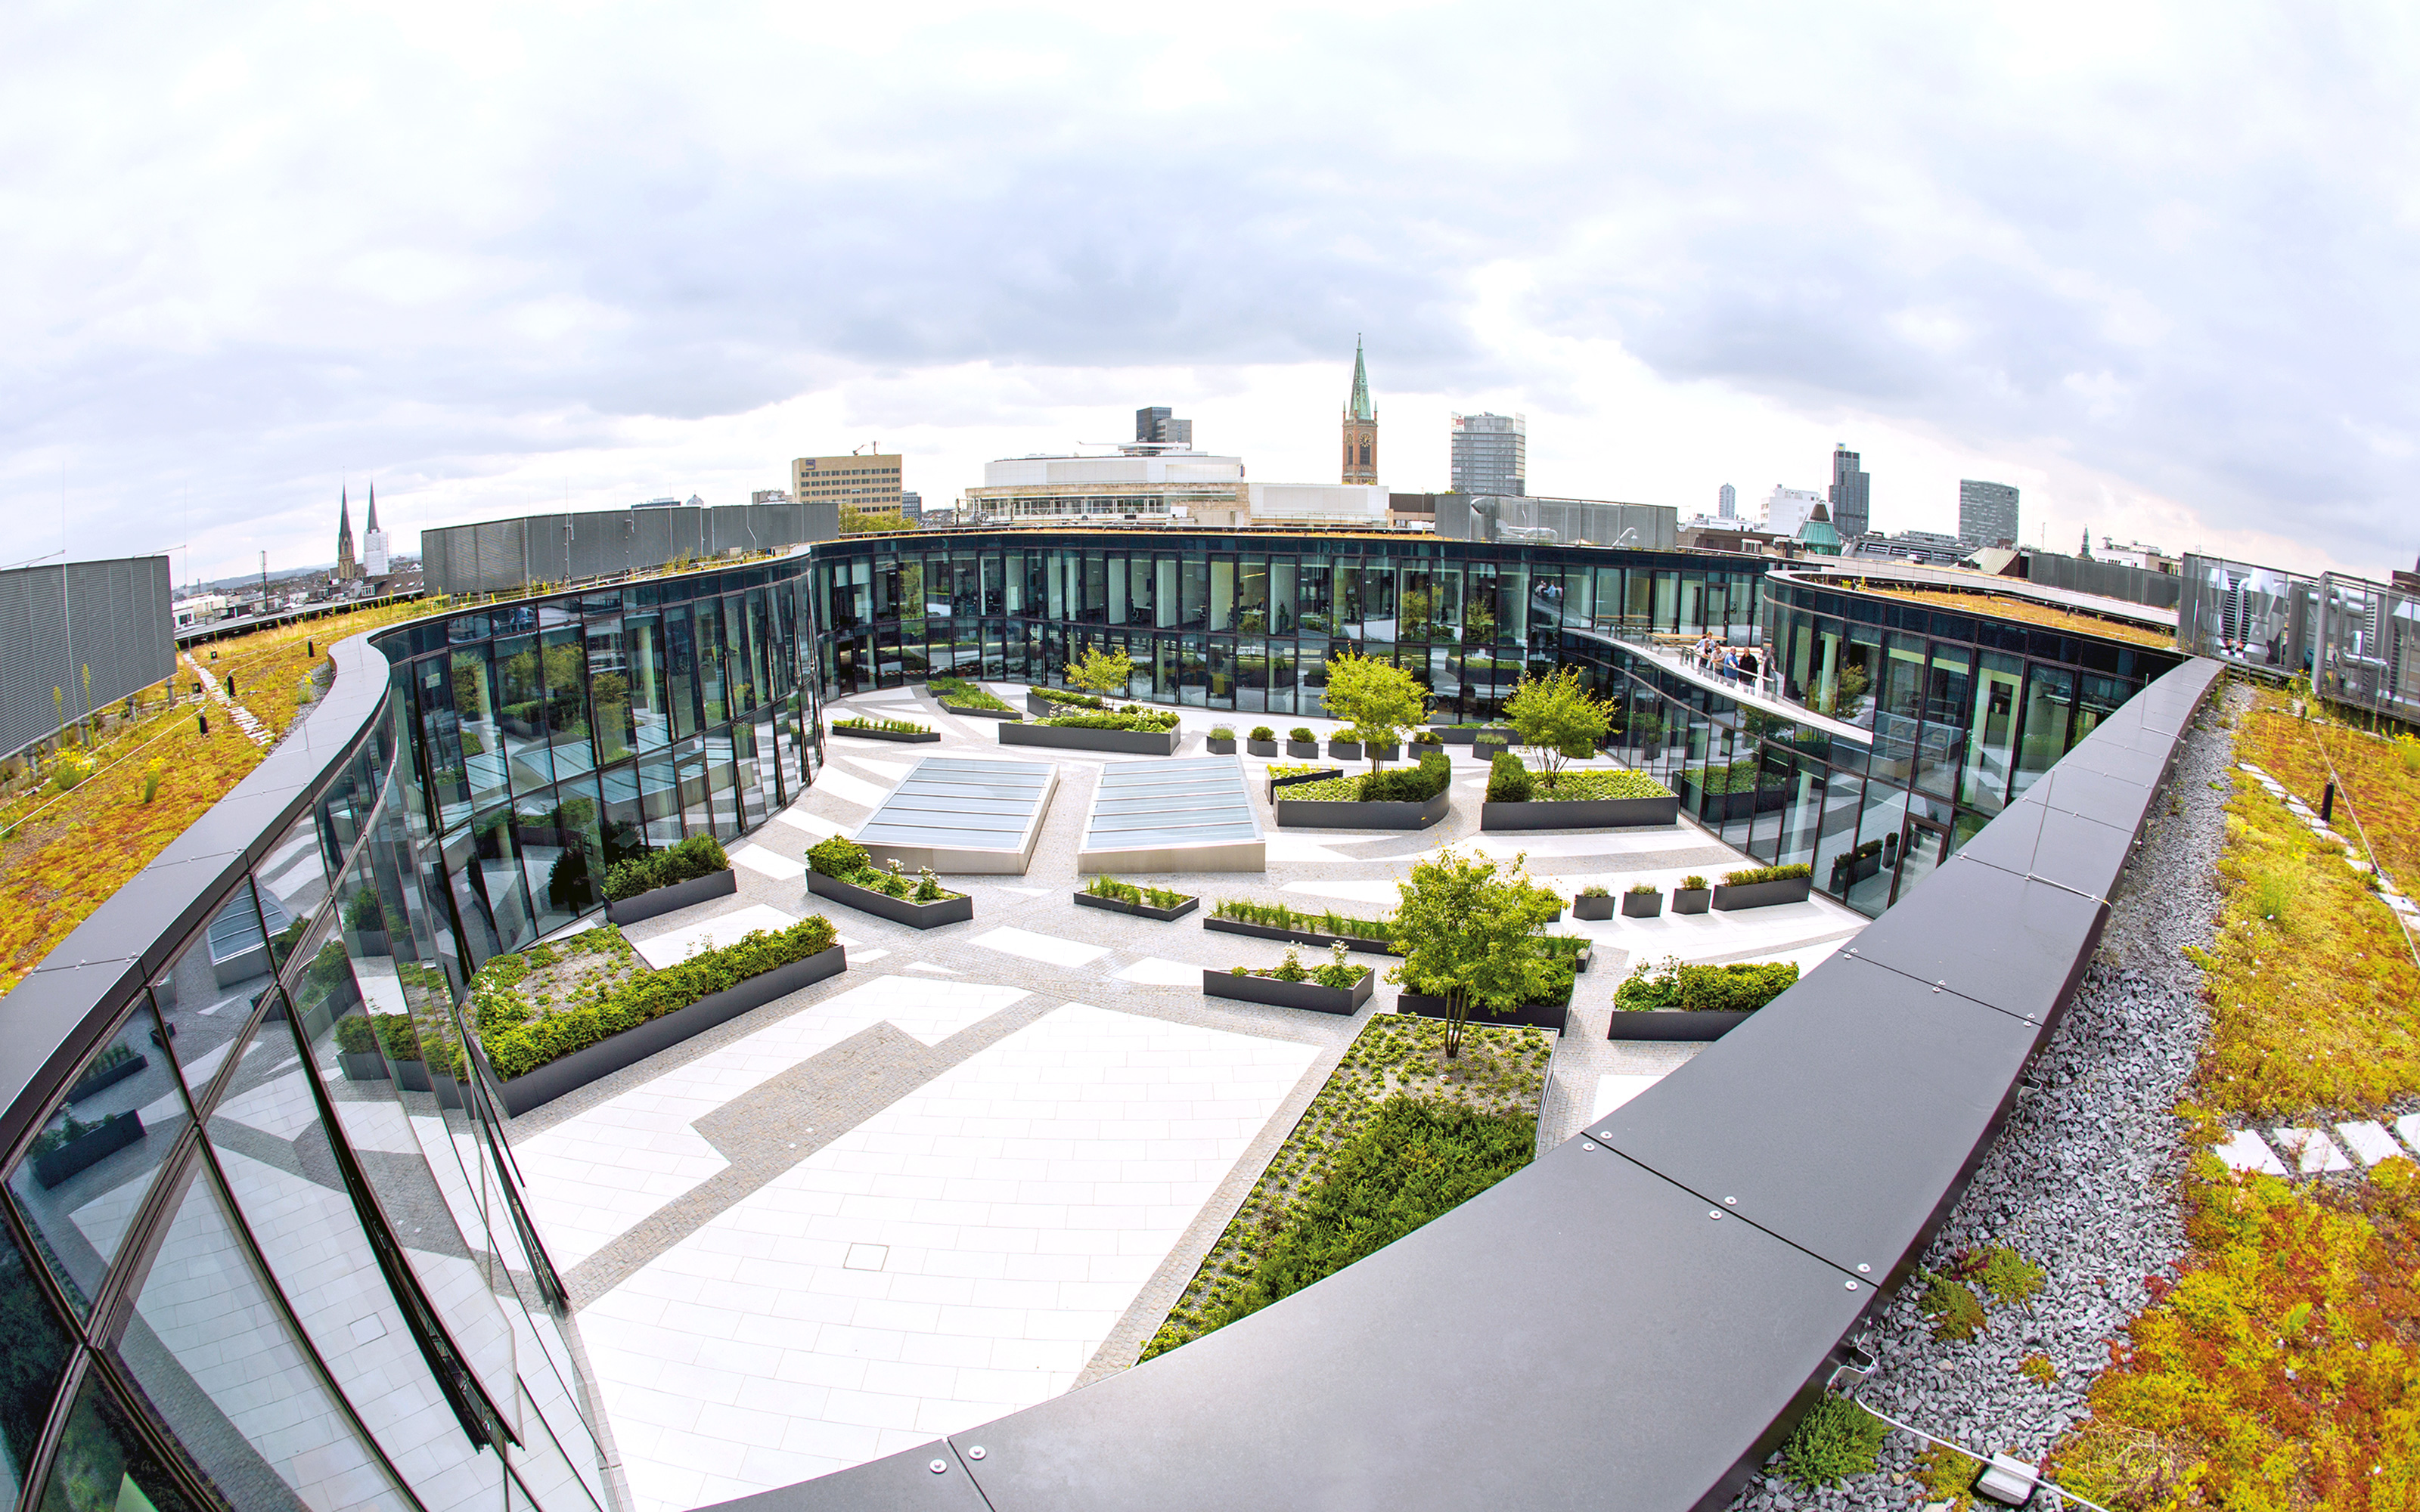 Green roofs planted with Sedum and view into the courtyard from above